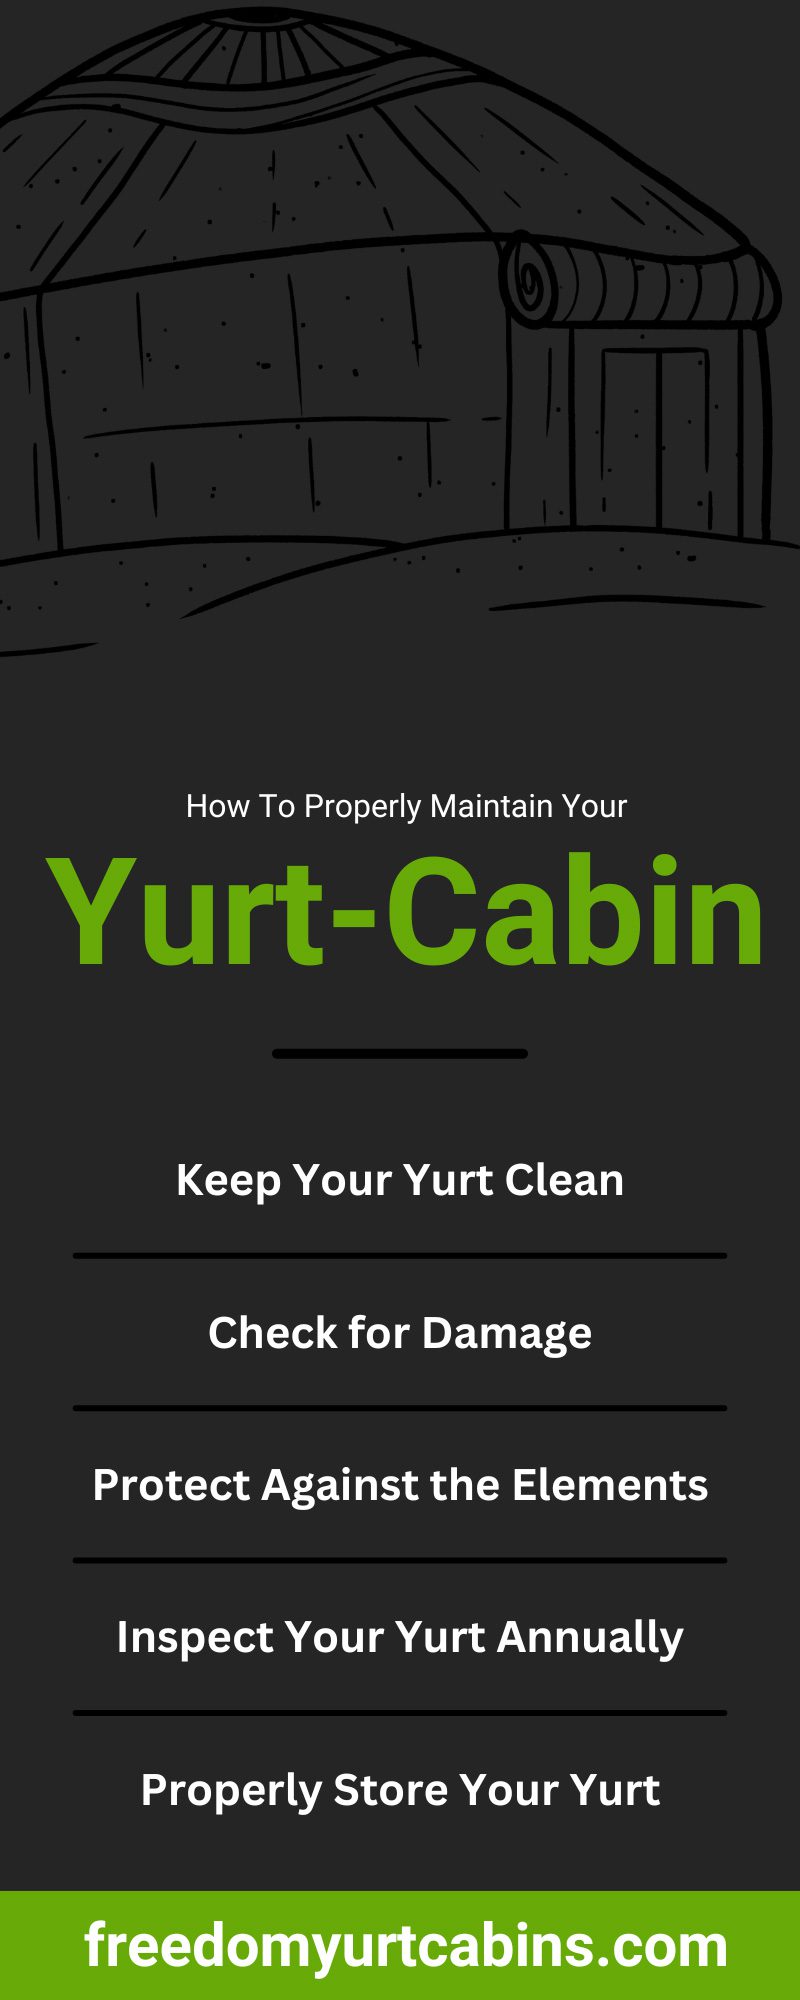 How To Properly Maintain Your Yurt-Cabin